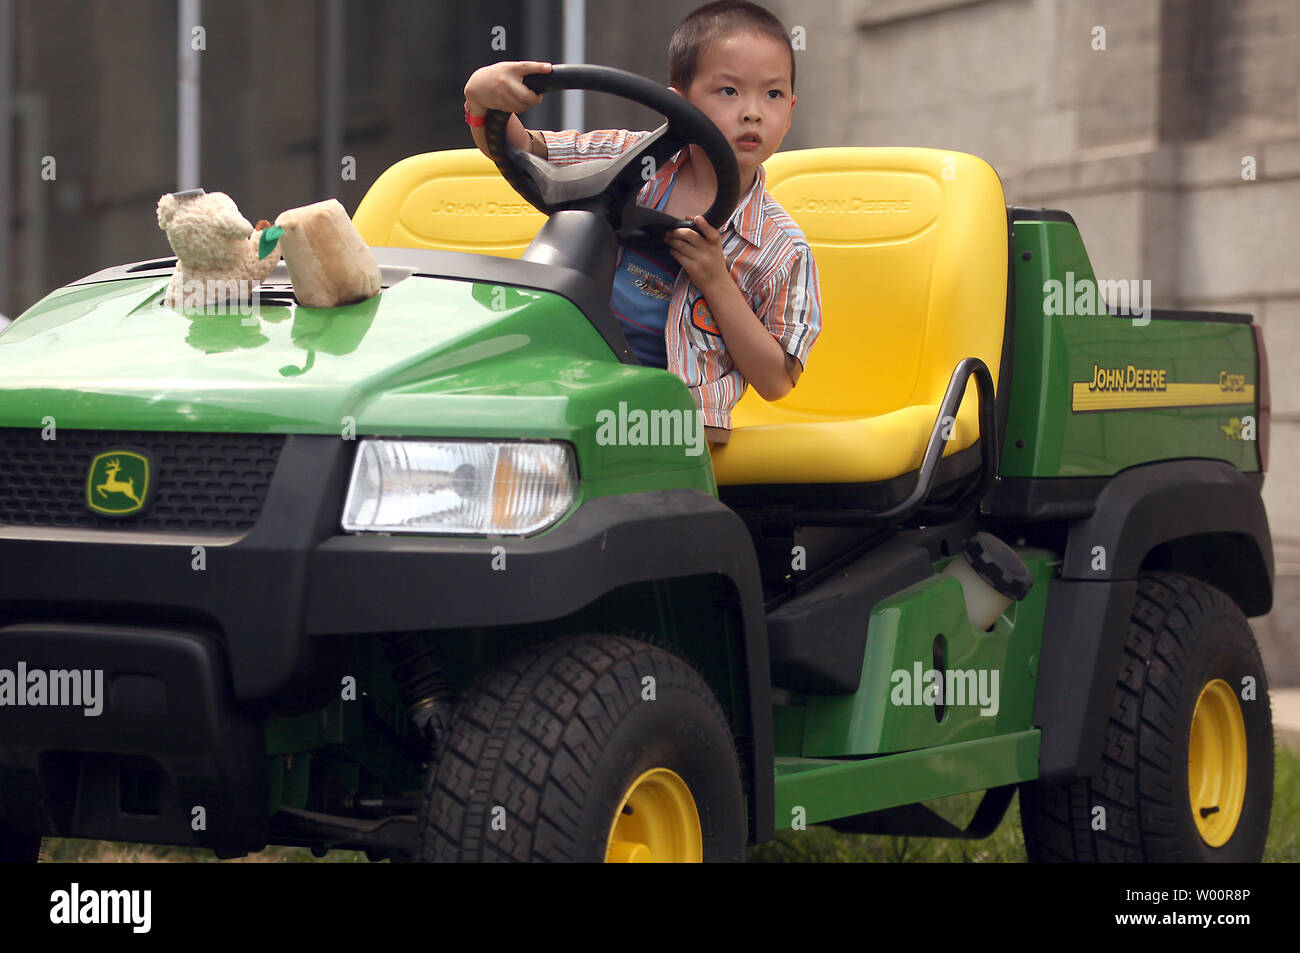 A Chinese boy pretends to drive a John Deere utility vehicle during a 4th of July Independence Day celebration and barbecue sponsored by the American Chamber of Commerce-China in Beijing on July 4, 2010.     UPI/Stephen Shaver Stock Photo